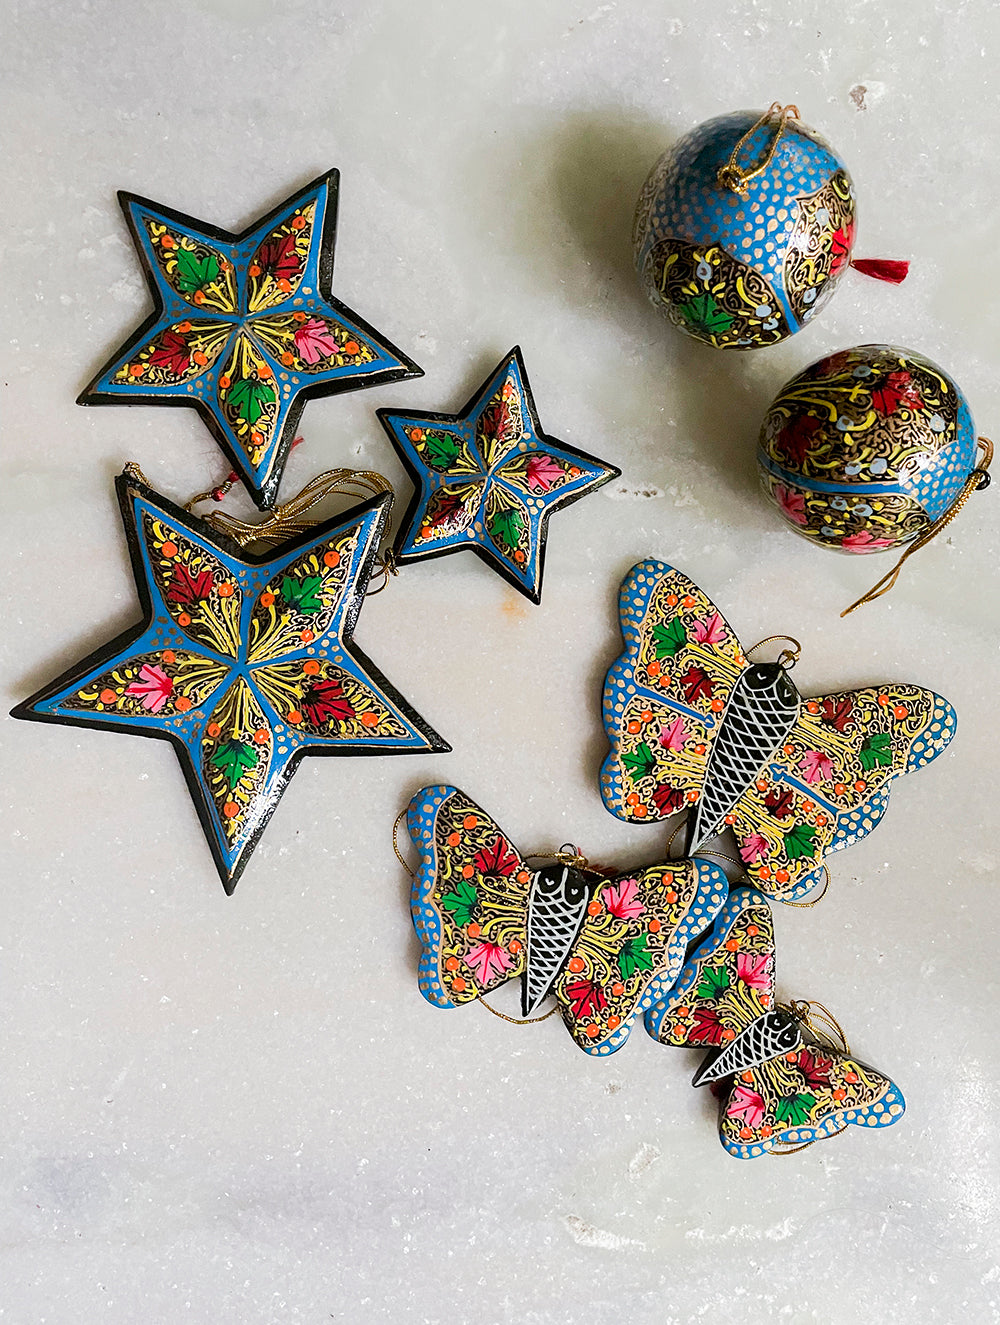 Load image into Gallery viewer, Kashmiri Art Xmas Decorations - Set of 8 (3 Stars, 3 Butterflies, 2 Baubles)